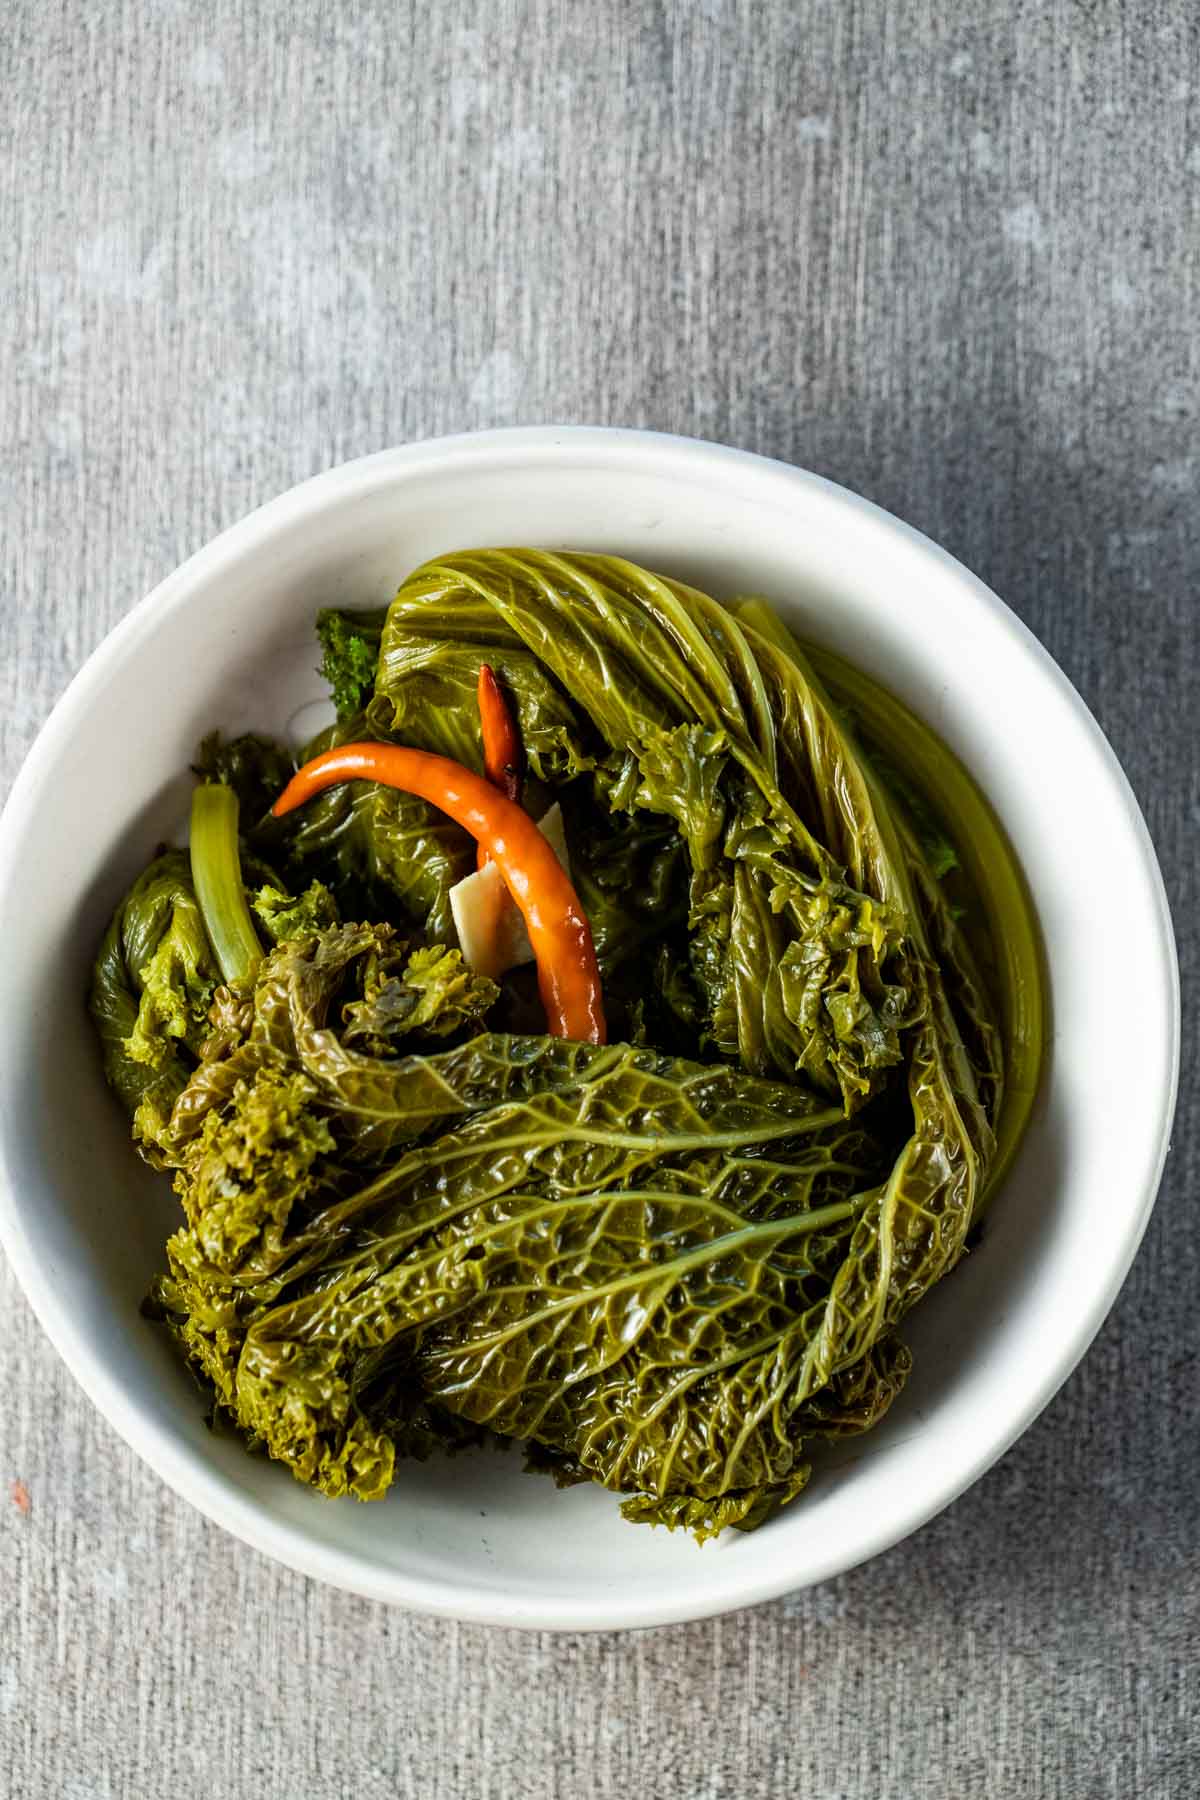 Haam choy, Pickled Mustard Greens is - The Woks of Life